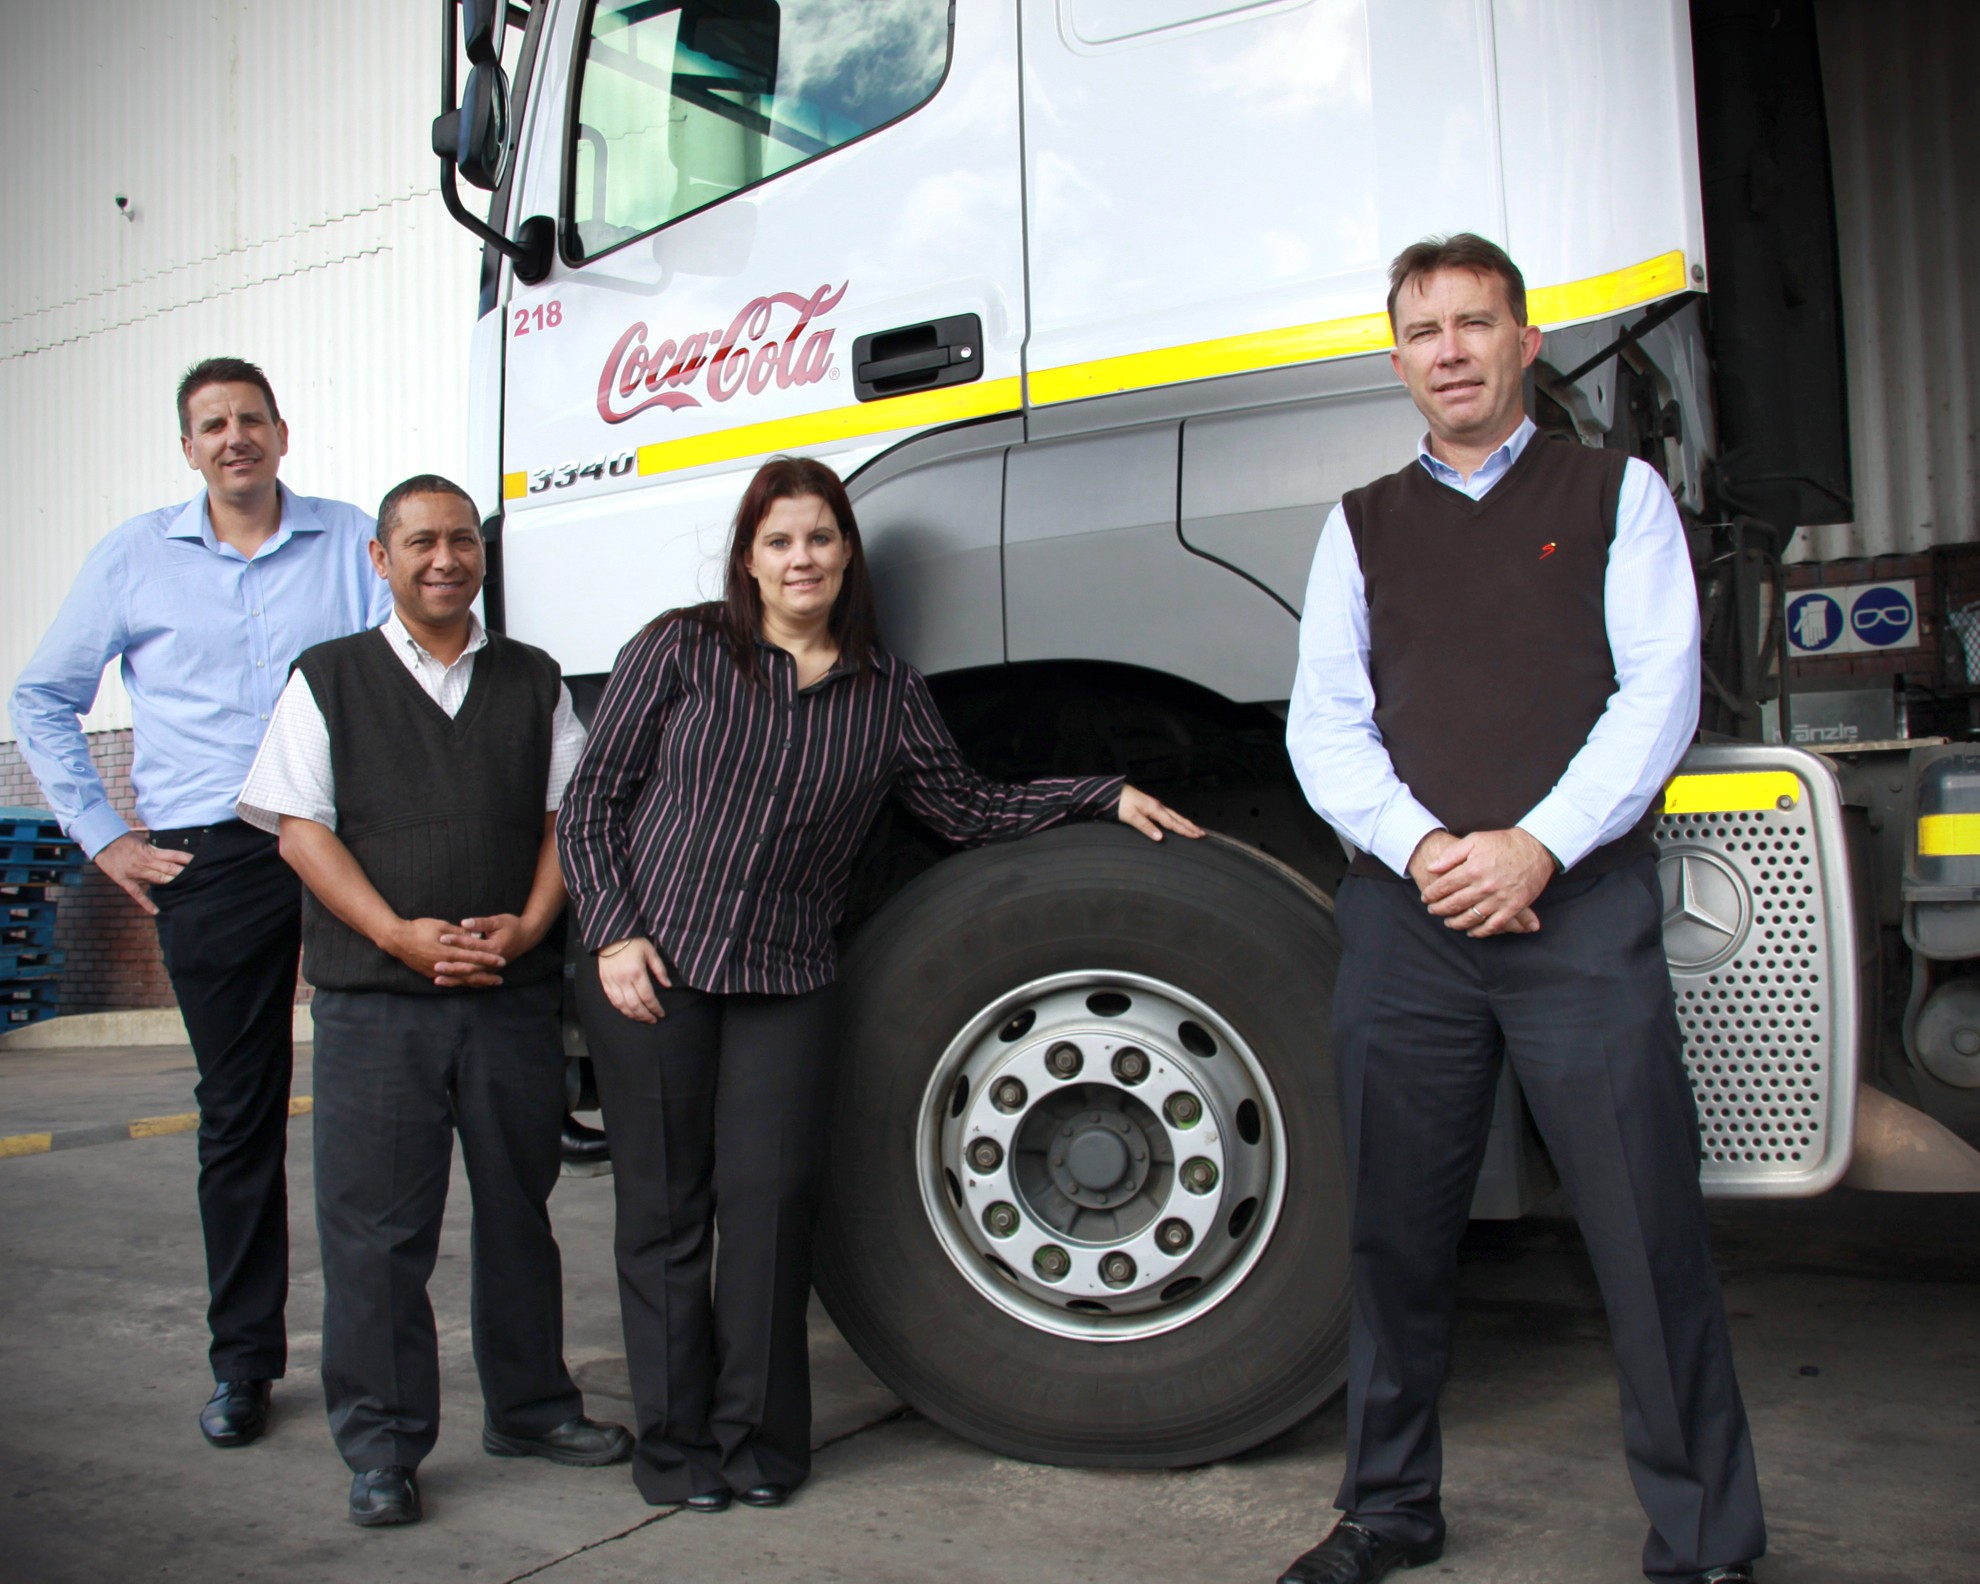 Goodyear Truck Tyres for Coca-Cola